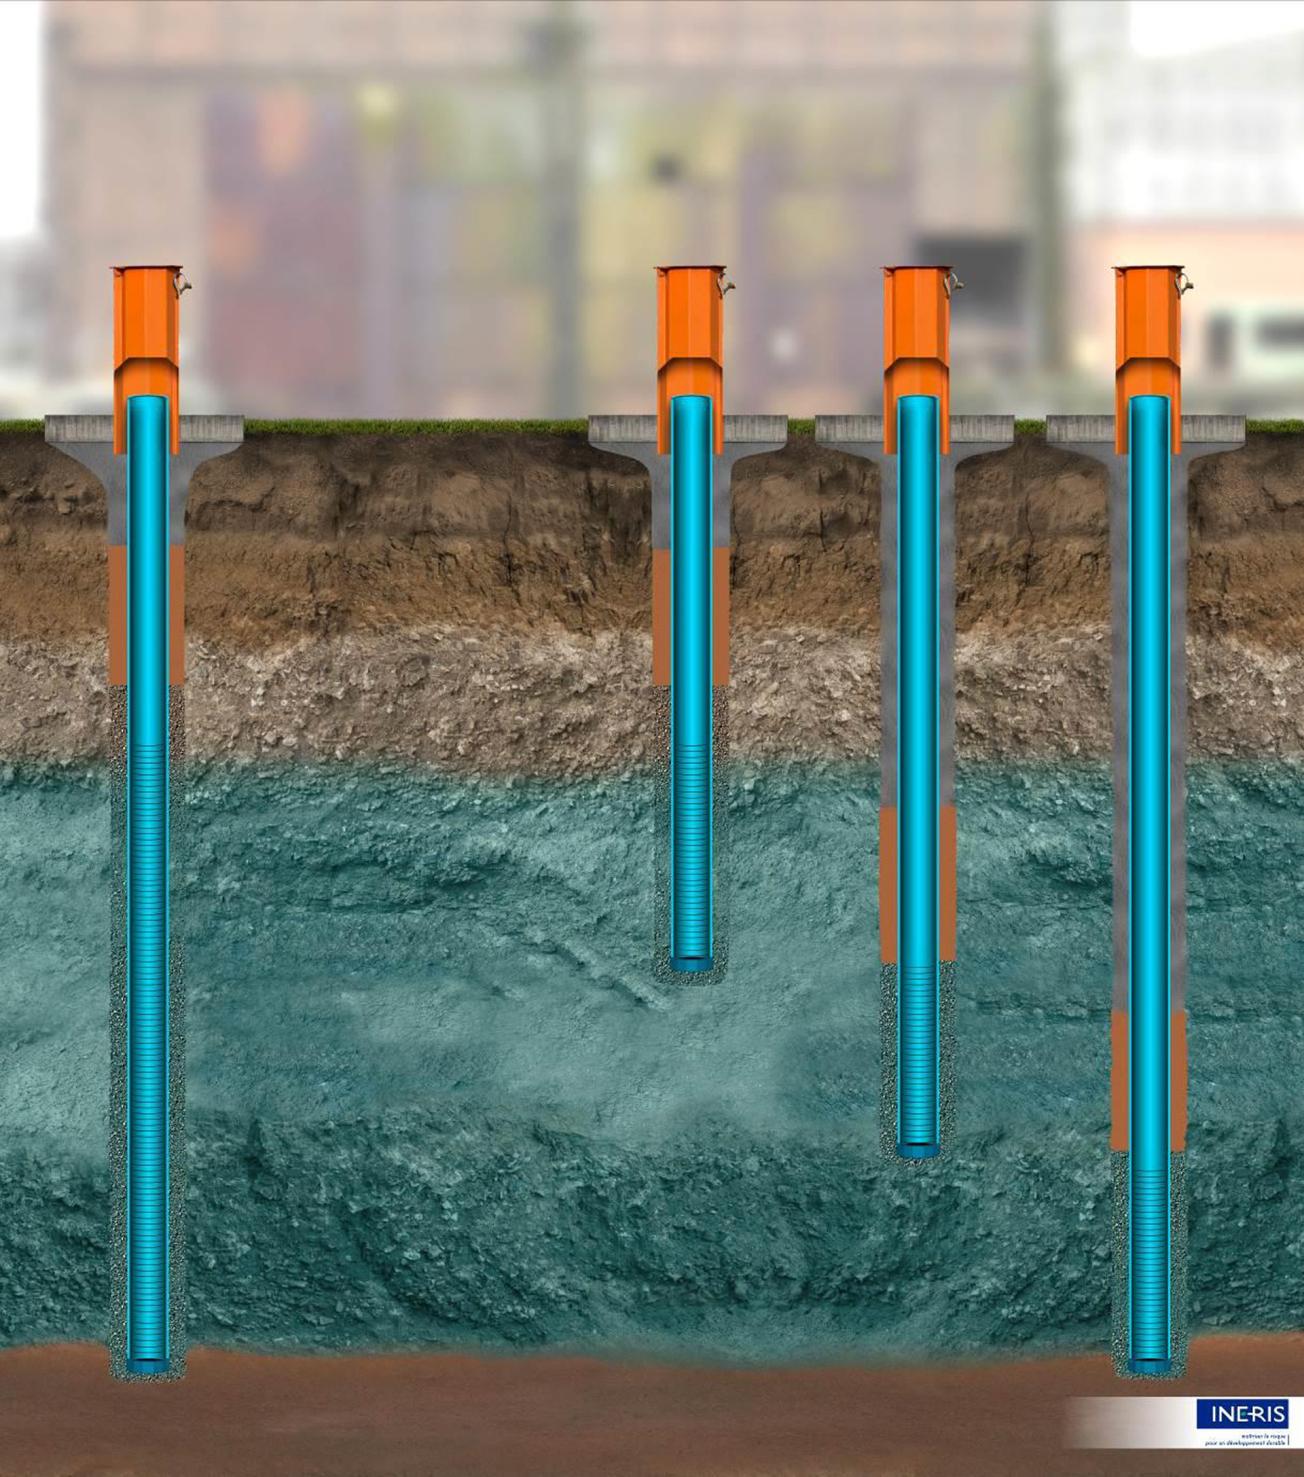 Different types of boreholes can be set up for groundwater monitoring 